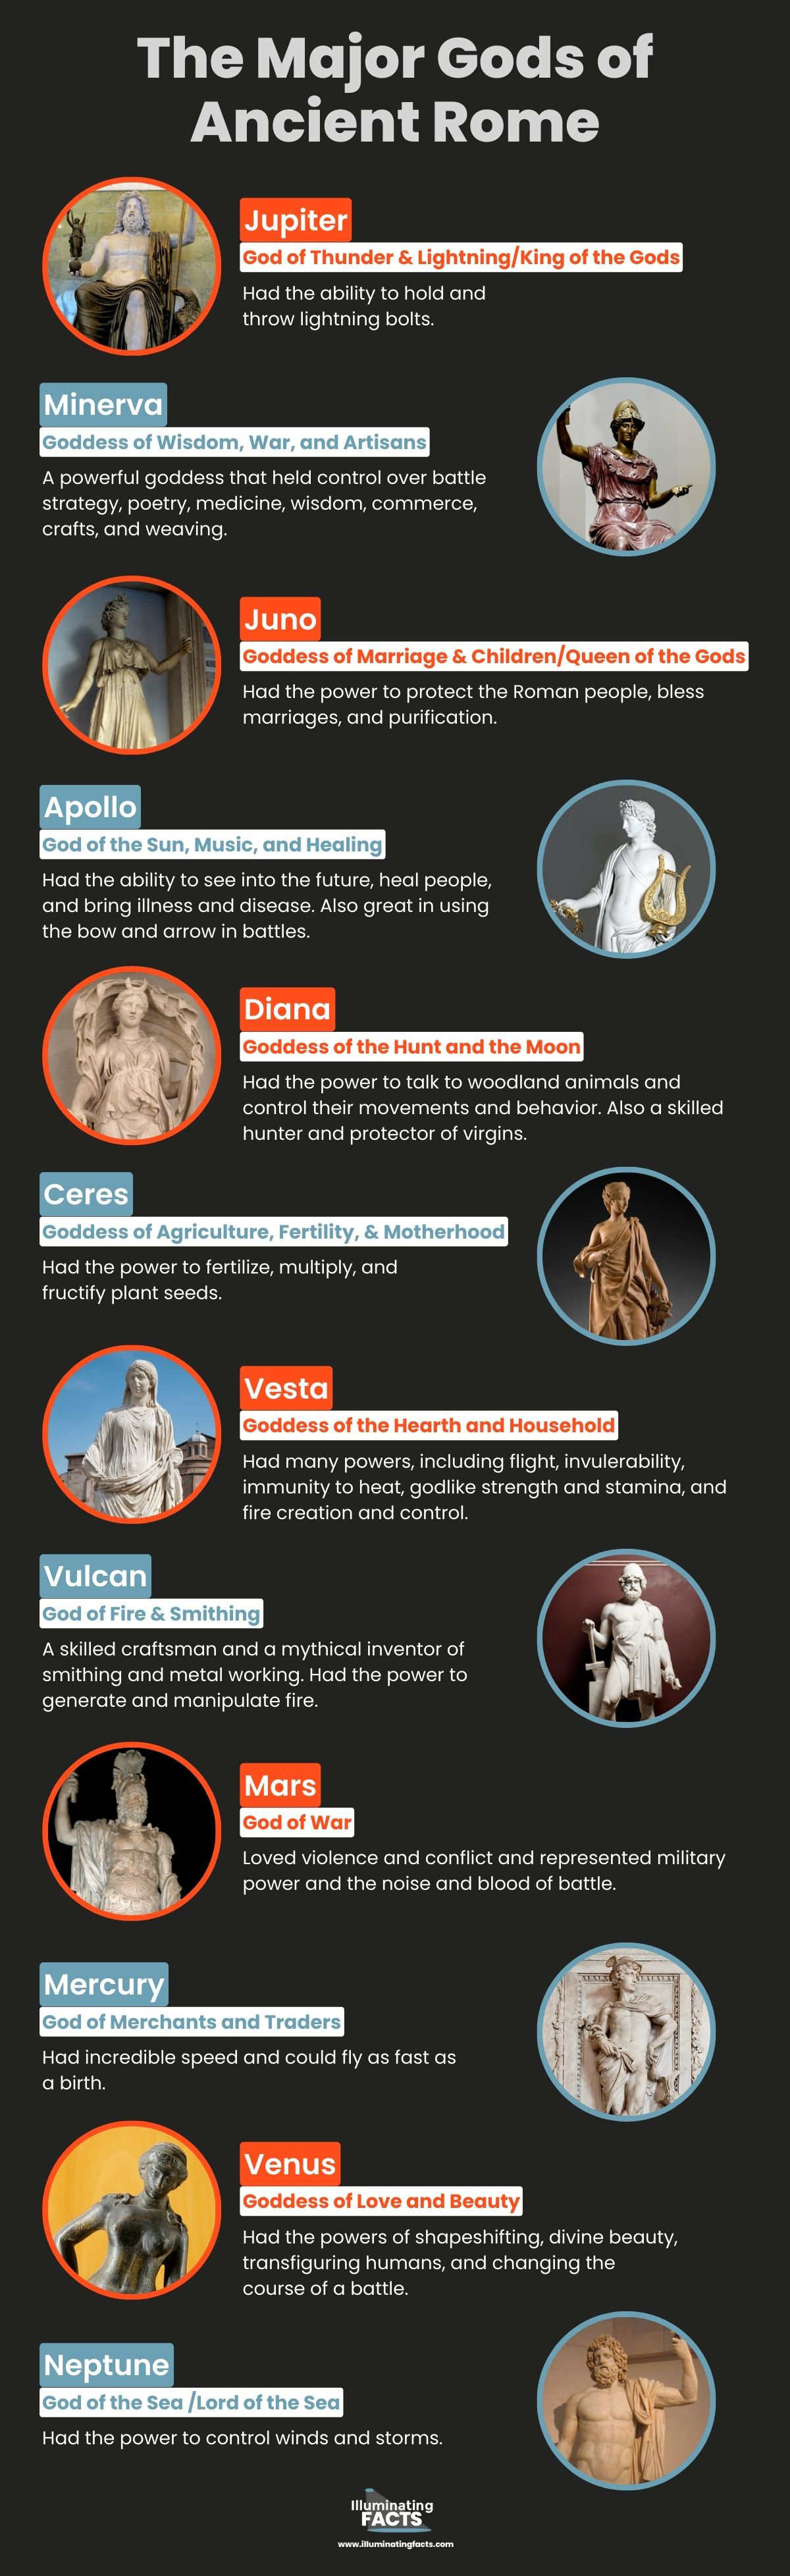 The Major Gods of Ancient Rome